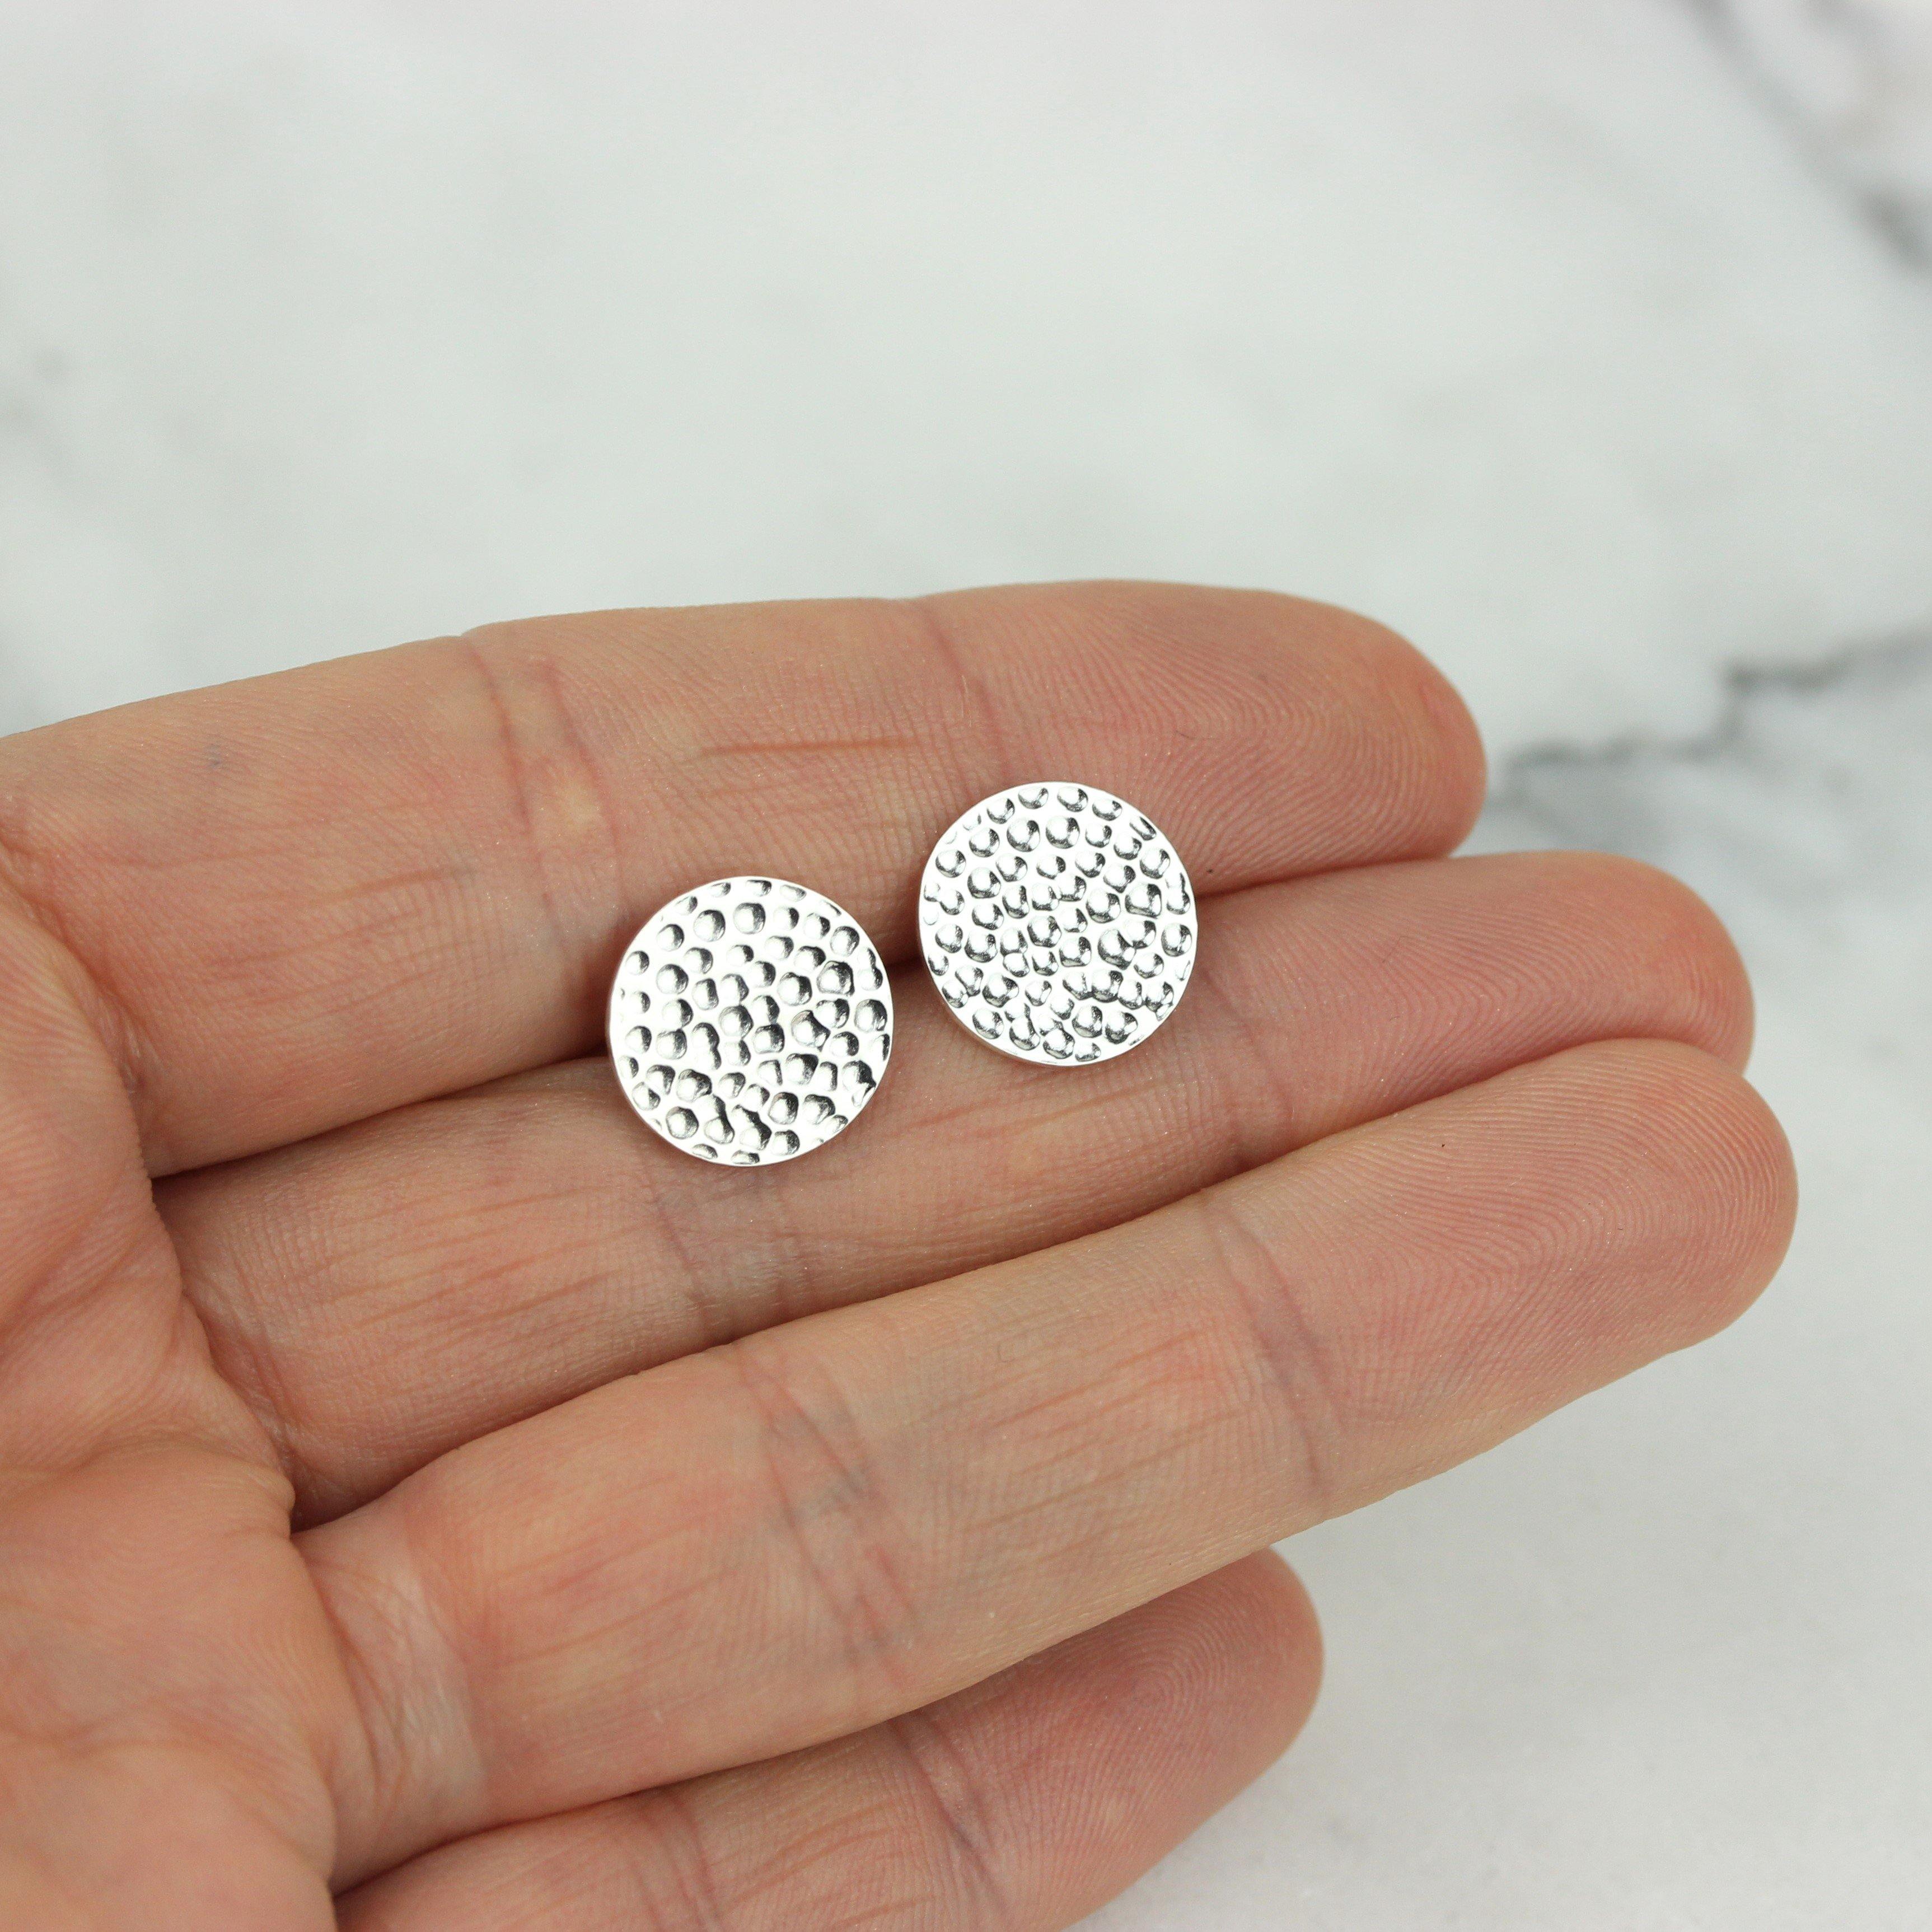 Sterling Silver 12mm Round Hammered Beaten Flat Disc Stud Earrings - STERLING SILVER DESIGNS